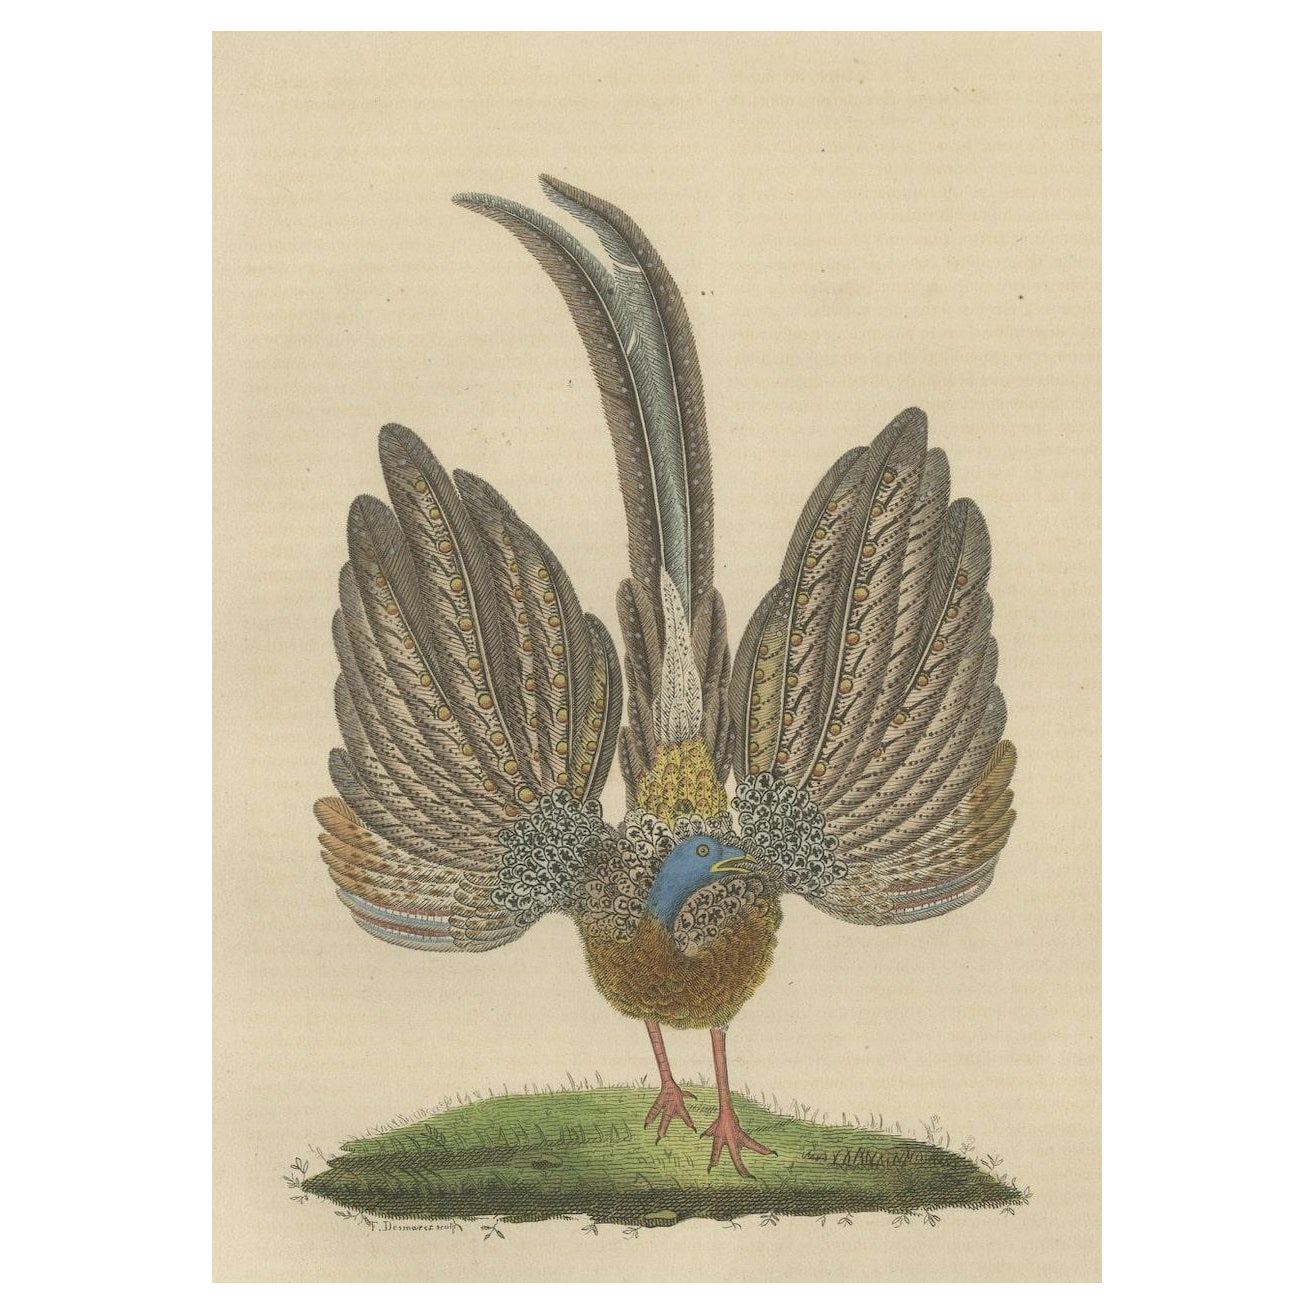 Stunning Decorative Old Hand-Colored Bird Print of a Pheasant For Sale